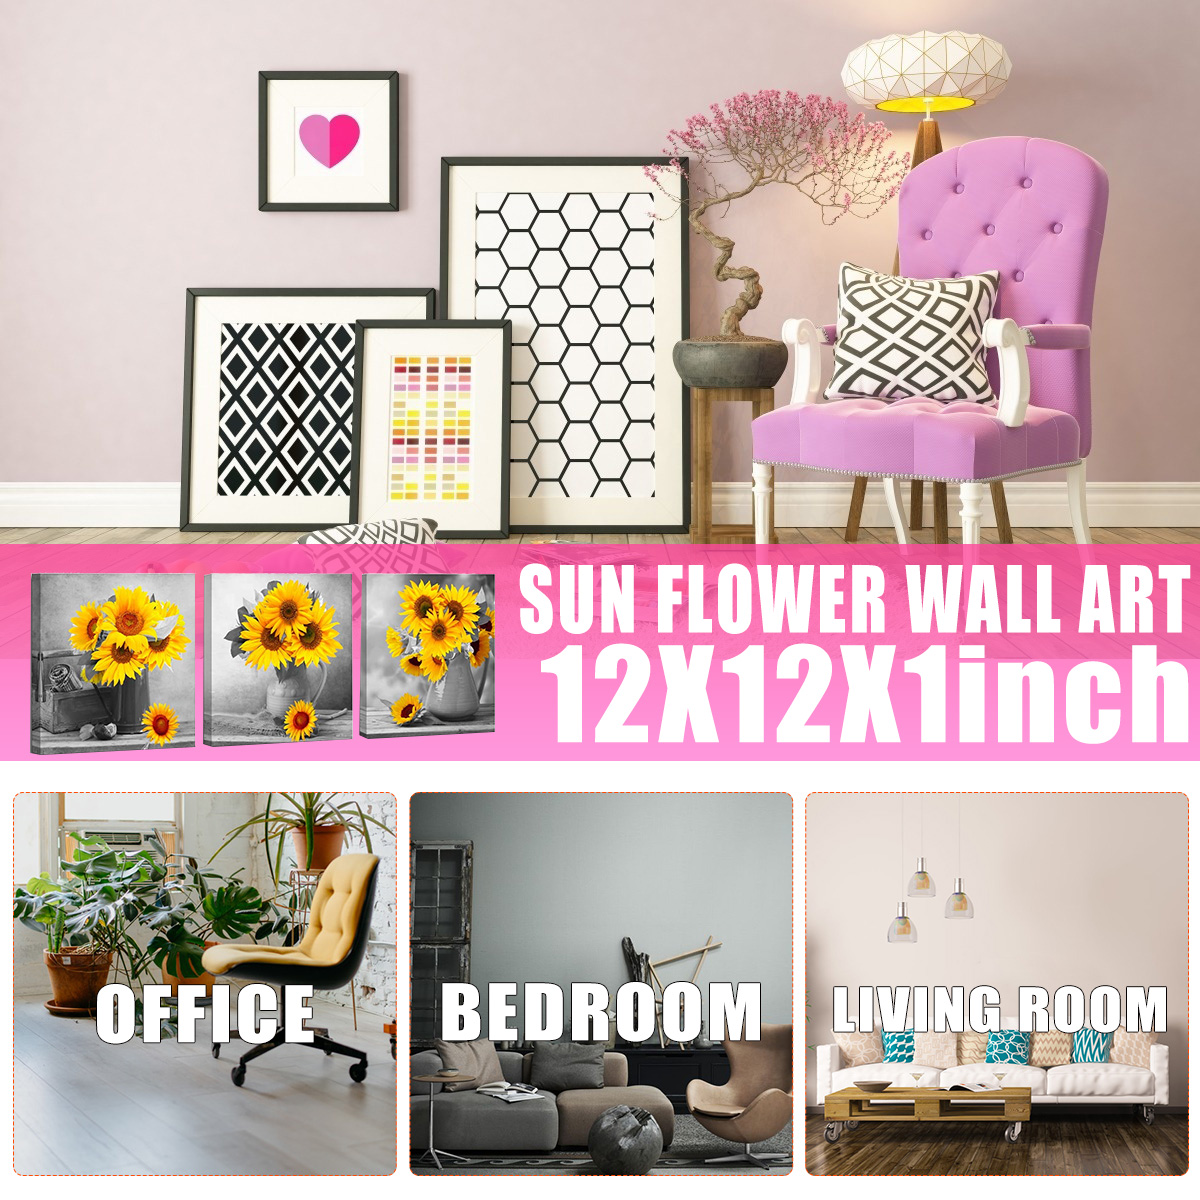 30303-cm-Sunflower-Wall-Art-Painting-Living-Room-Bedroom-Hanging-Canvas-Pictures-Office-Mural-Decora-1791798-2